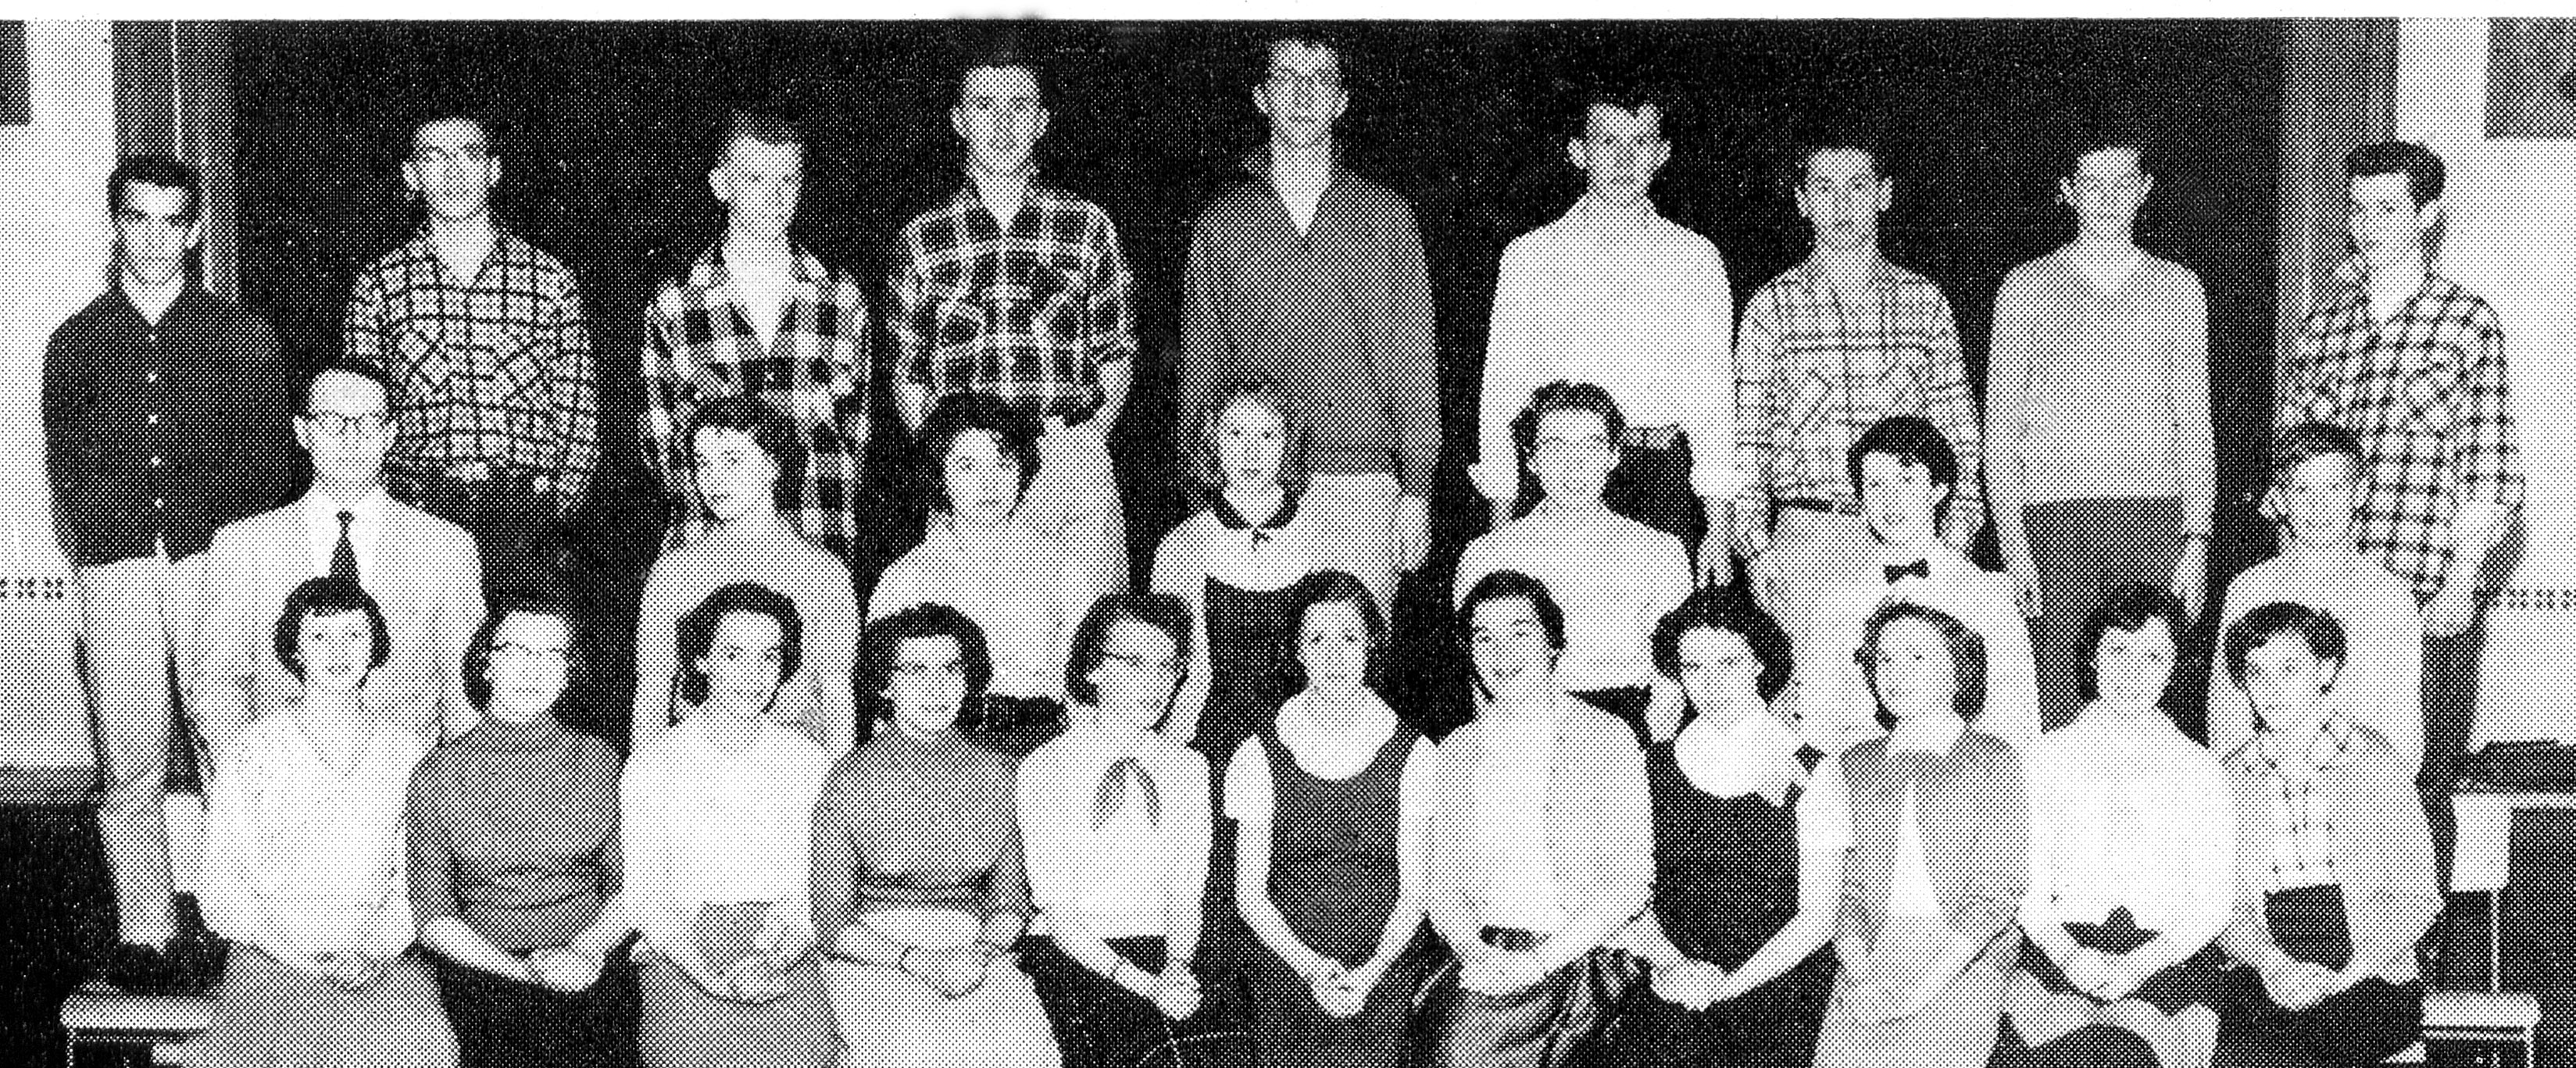 (Click to magnify) FRONT ROW: K. Lintner, C. Perry, S. McLean, E. Whitty, L. Noble, D. Hockley, A. Menar, D. Marnien, E. Curl, P. Bradbury, M. Bently;
SECOND ROW: Mr. Pierre Perreault, M. Shier, M. Wood, P. Egginton, M. Salmon, S. Henderson, T. Home;
BA